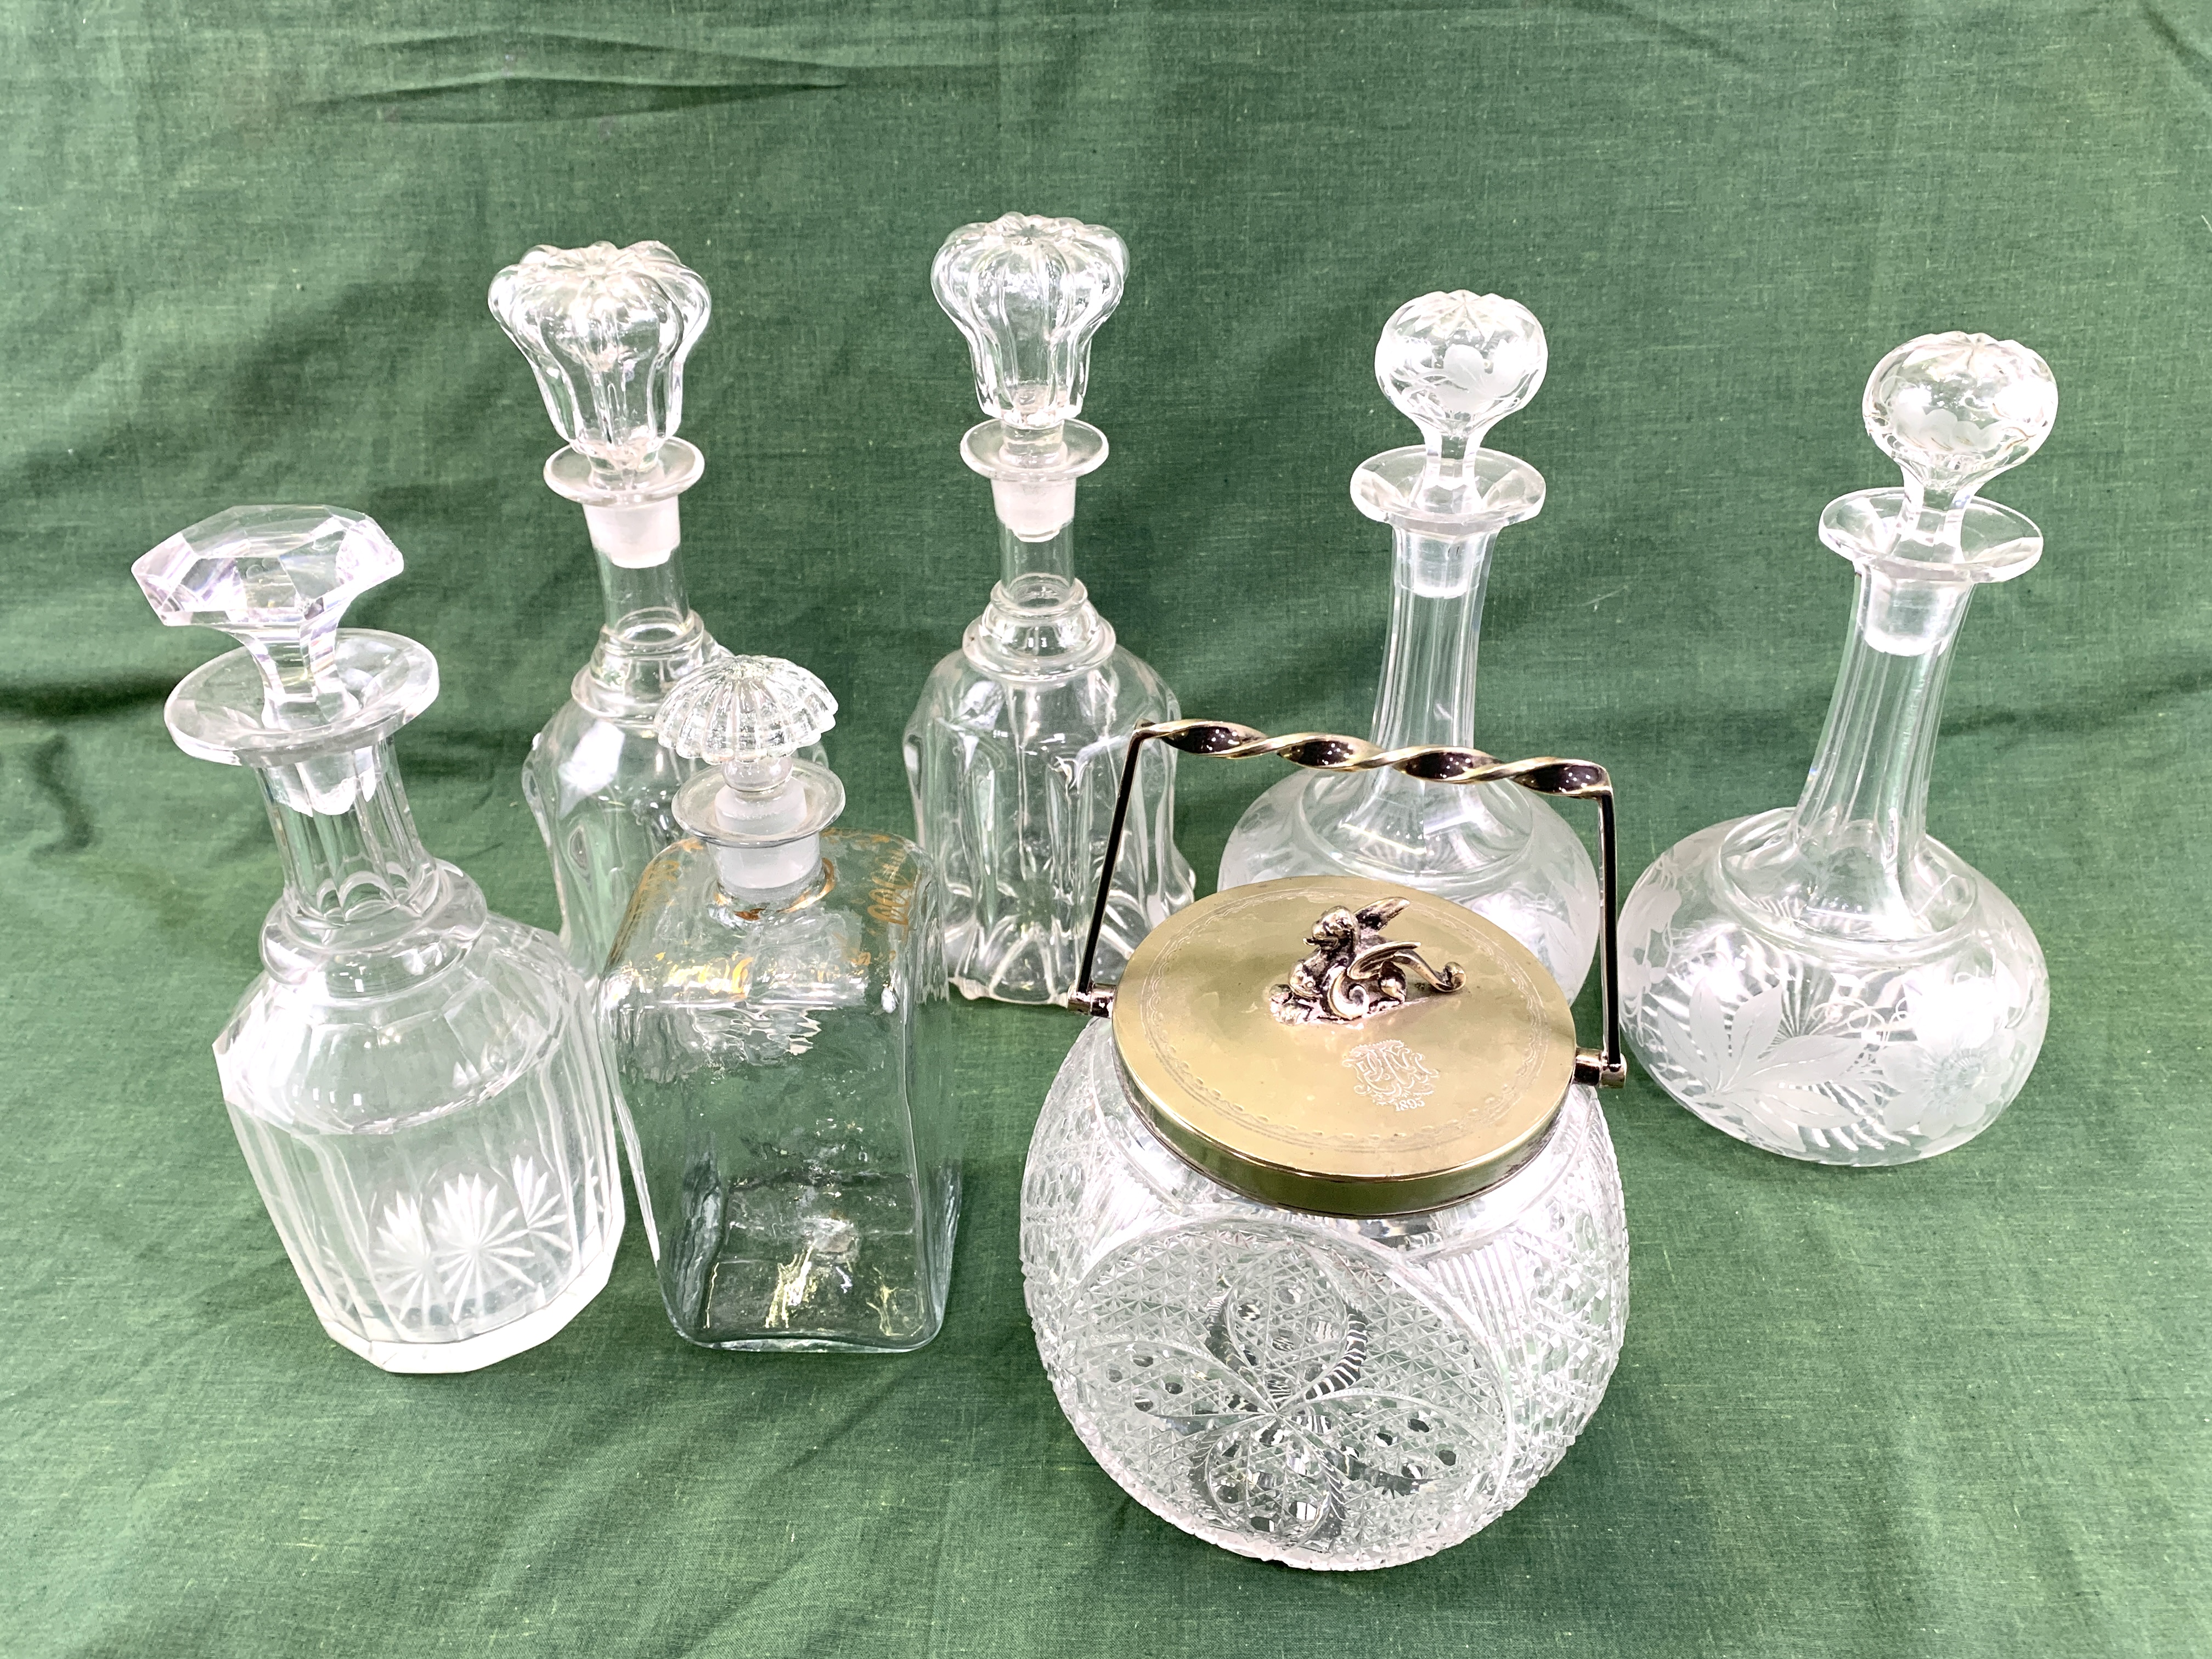 A pair of Victorian decanters, a pair of Edwardian decanters, and a cut glass biscuit barrel - Image 3 of 6